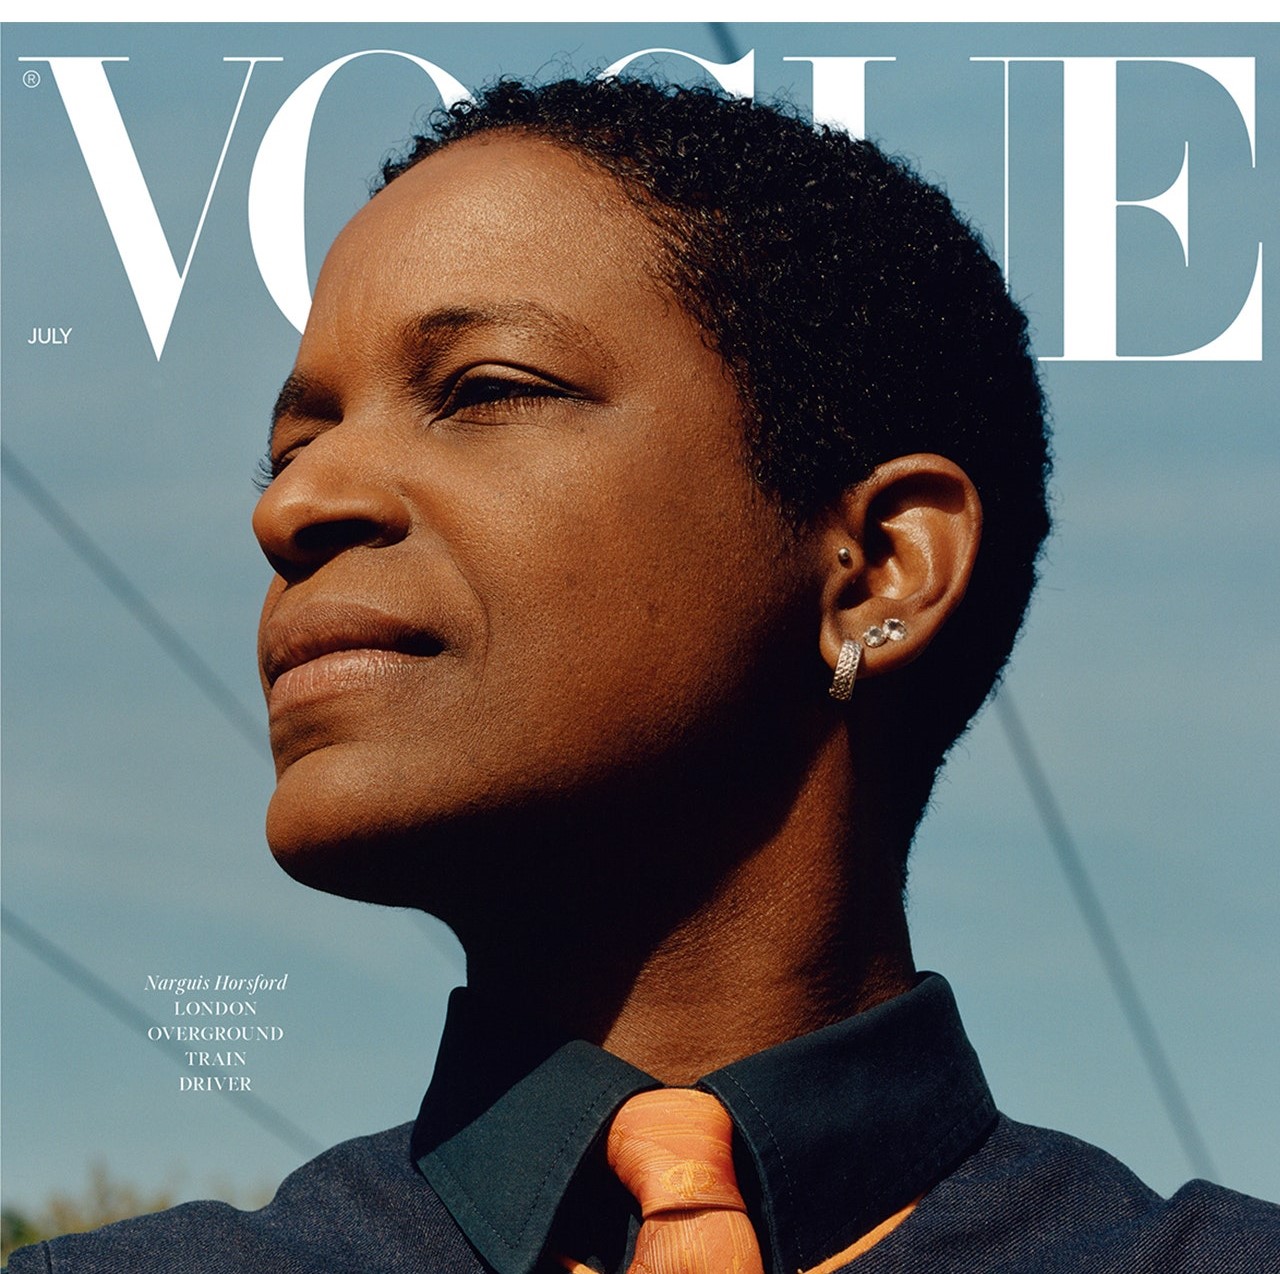 British Vogue Pays Homage to Key Workers with Latest Issue